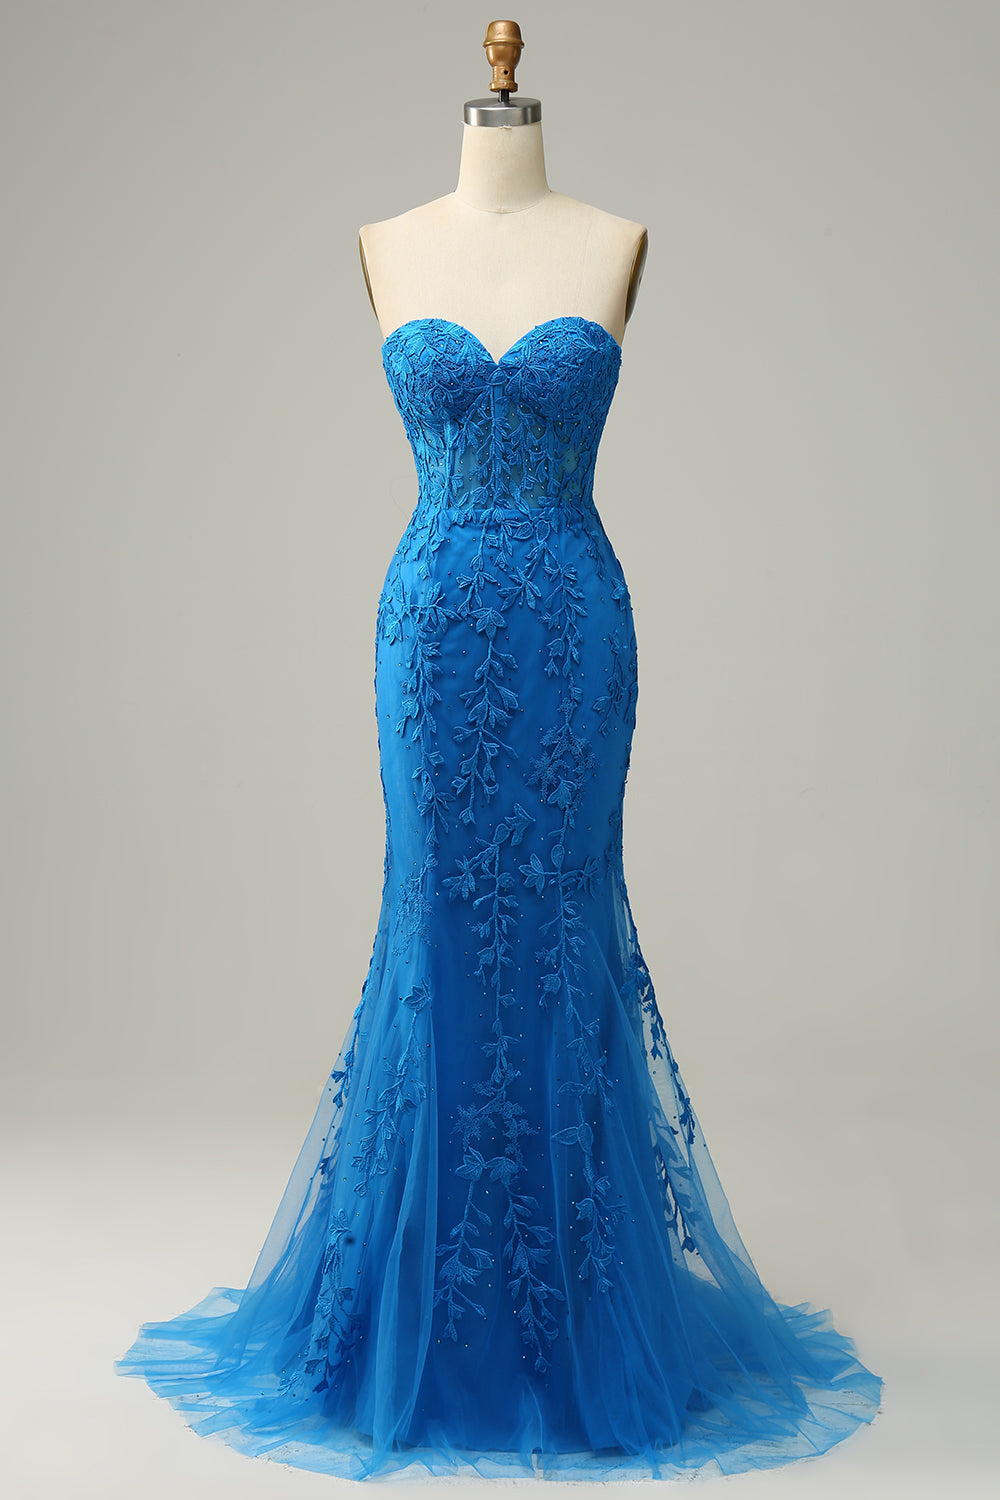 Mermaid Royal Blue Sweetheart Corset Back Prom Dress With Appliques